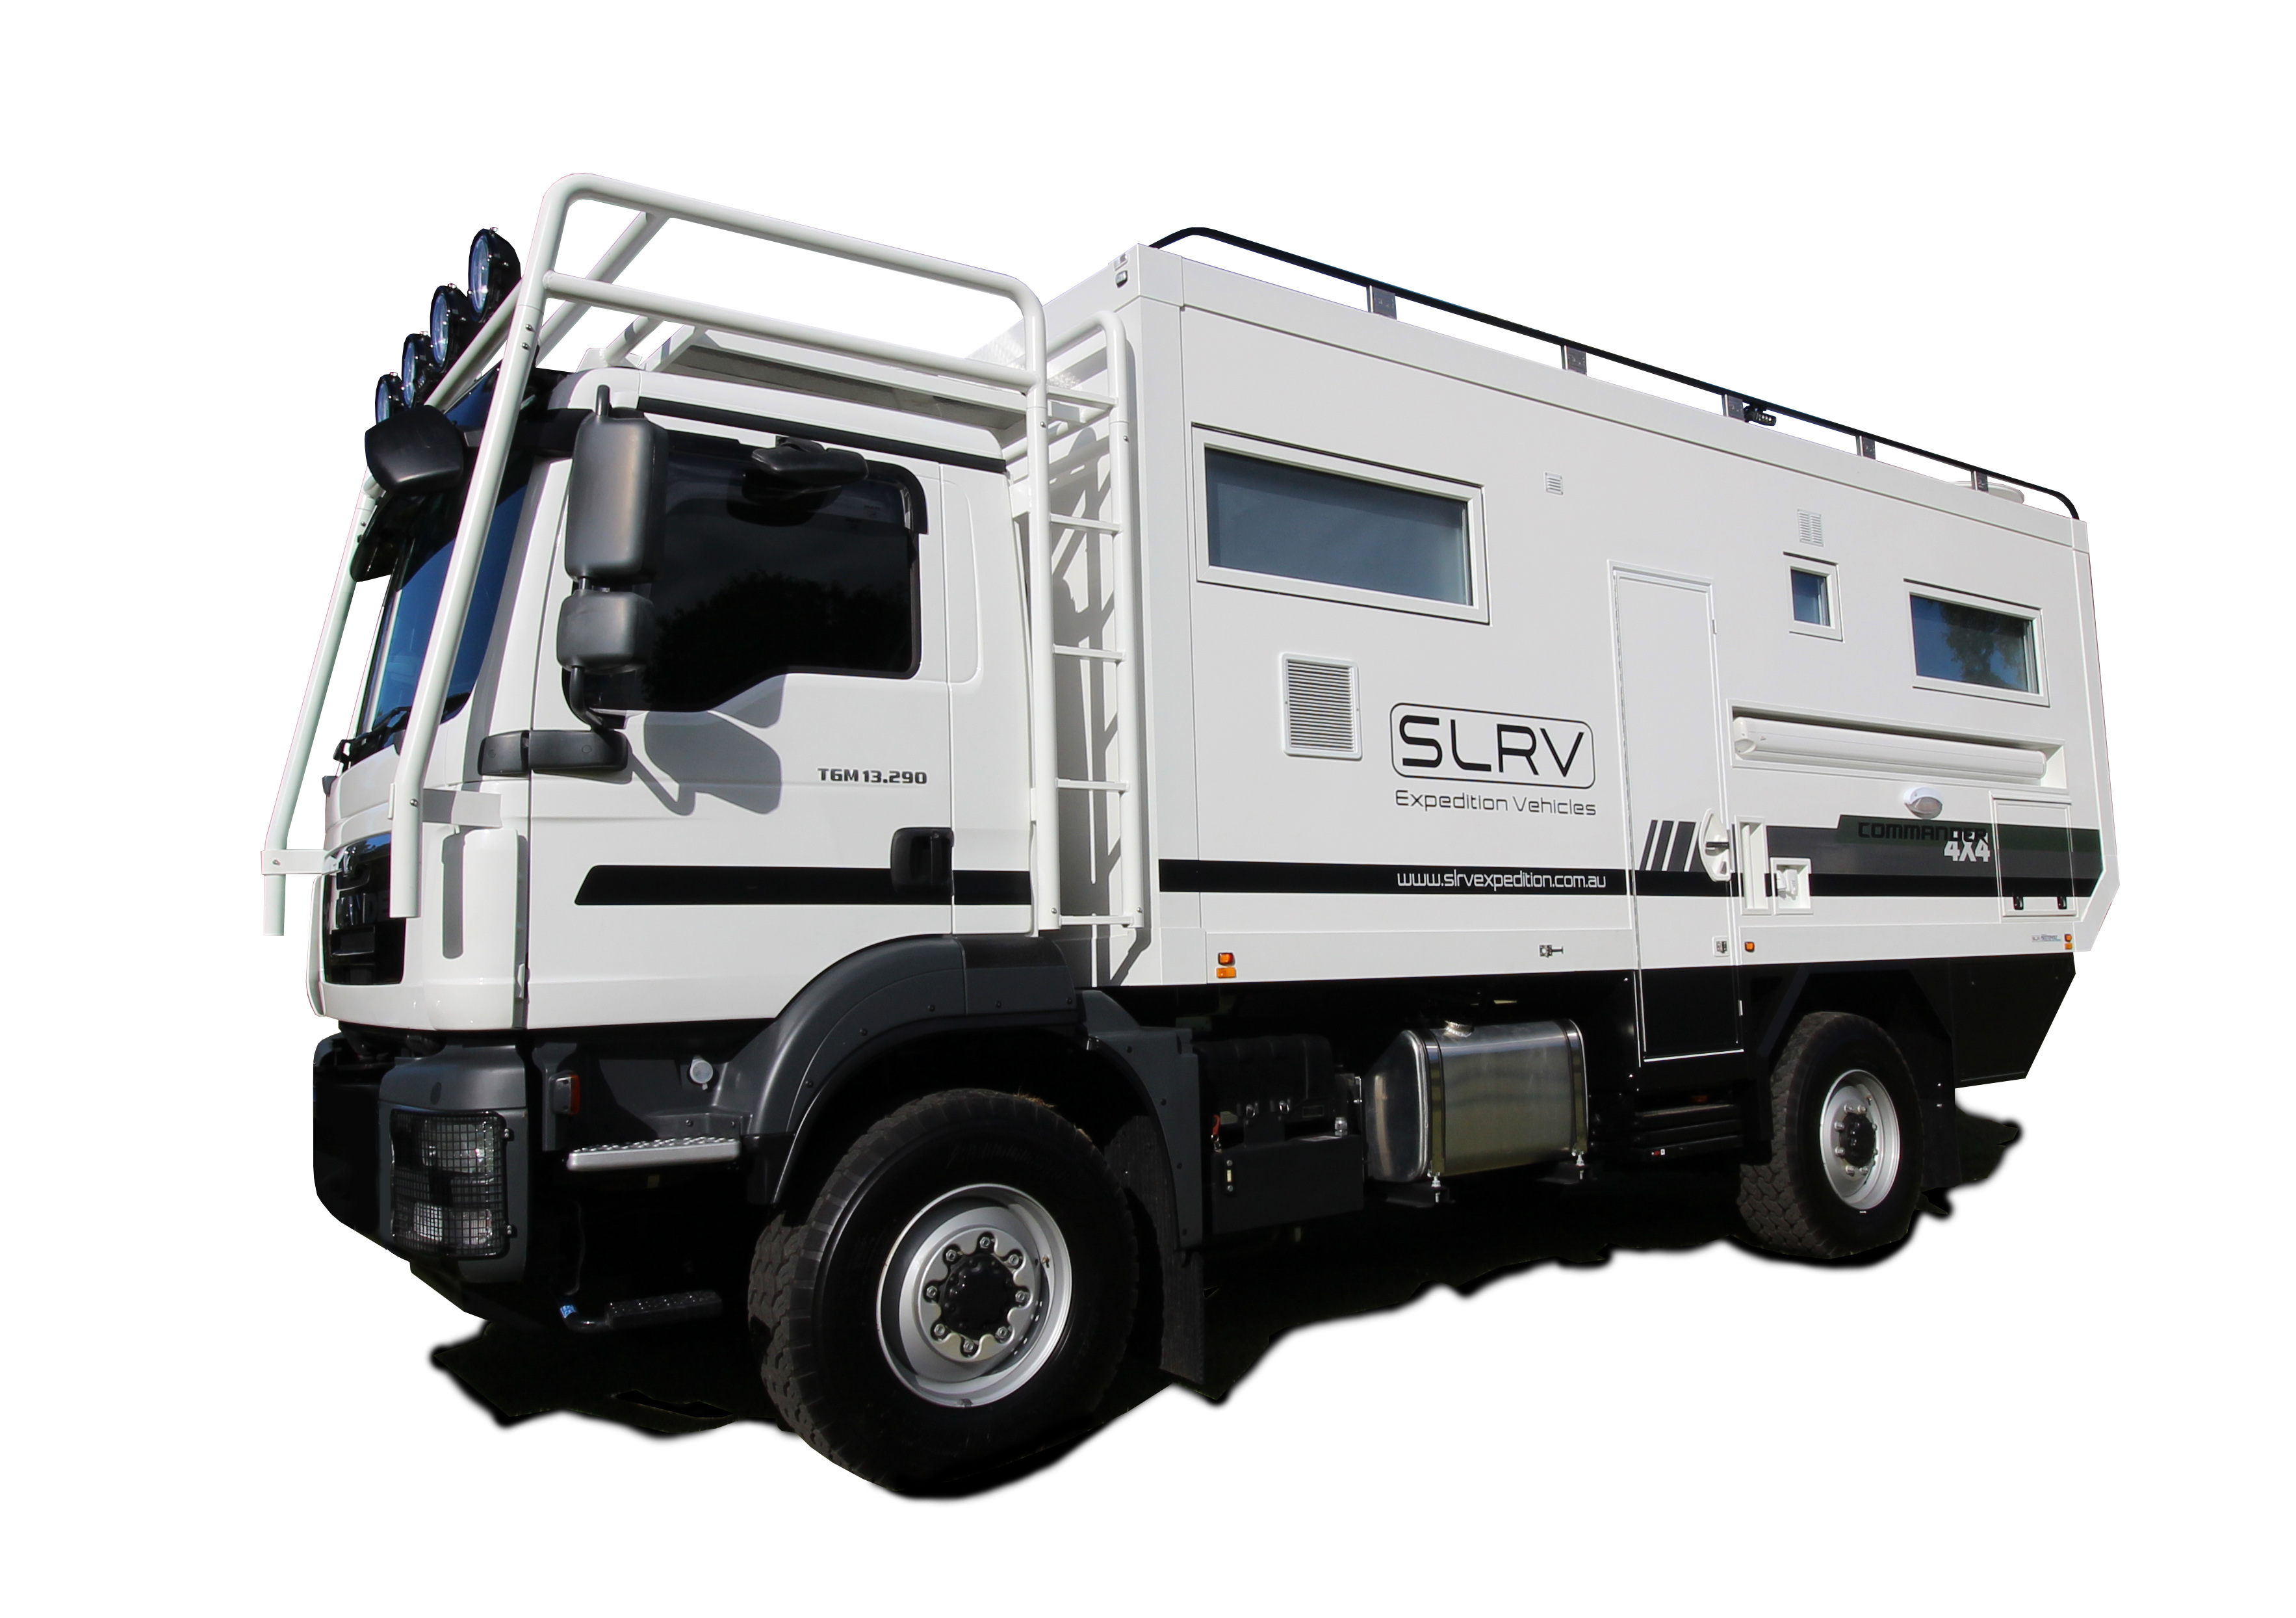 SLRV Expedition Vehicles and Luxury 4x4 Motorhomes